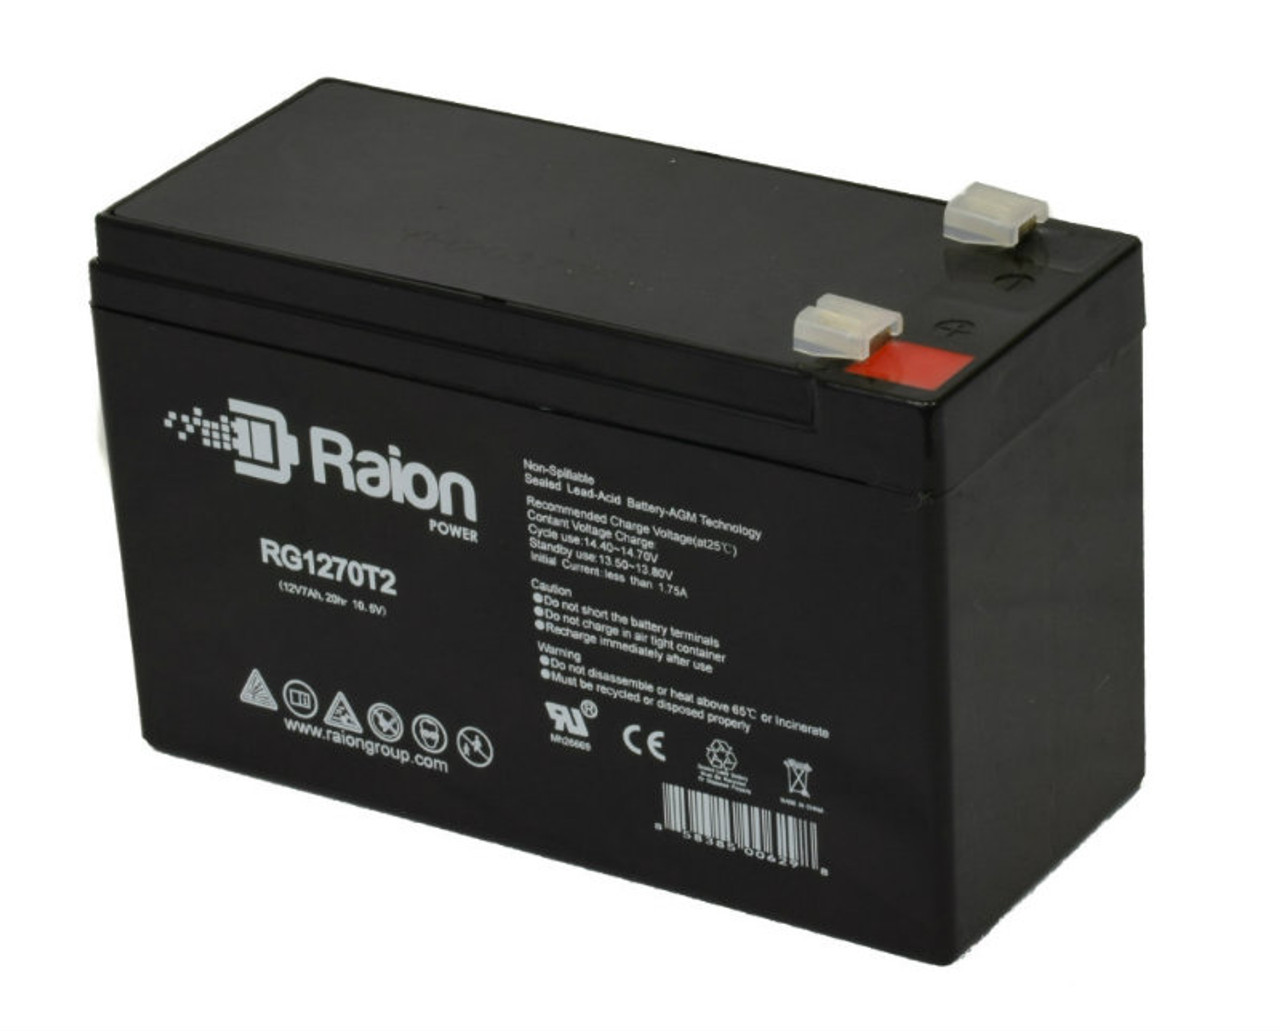 Raion Power RG1270T2 12V 7Ah Rechargeable Battery for XNB SN12007.2